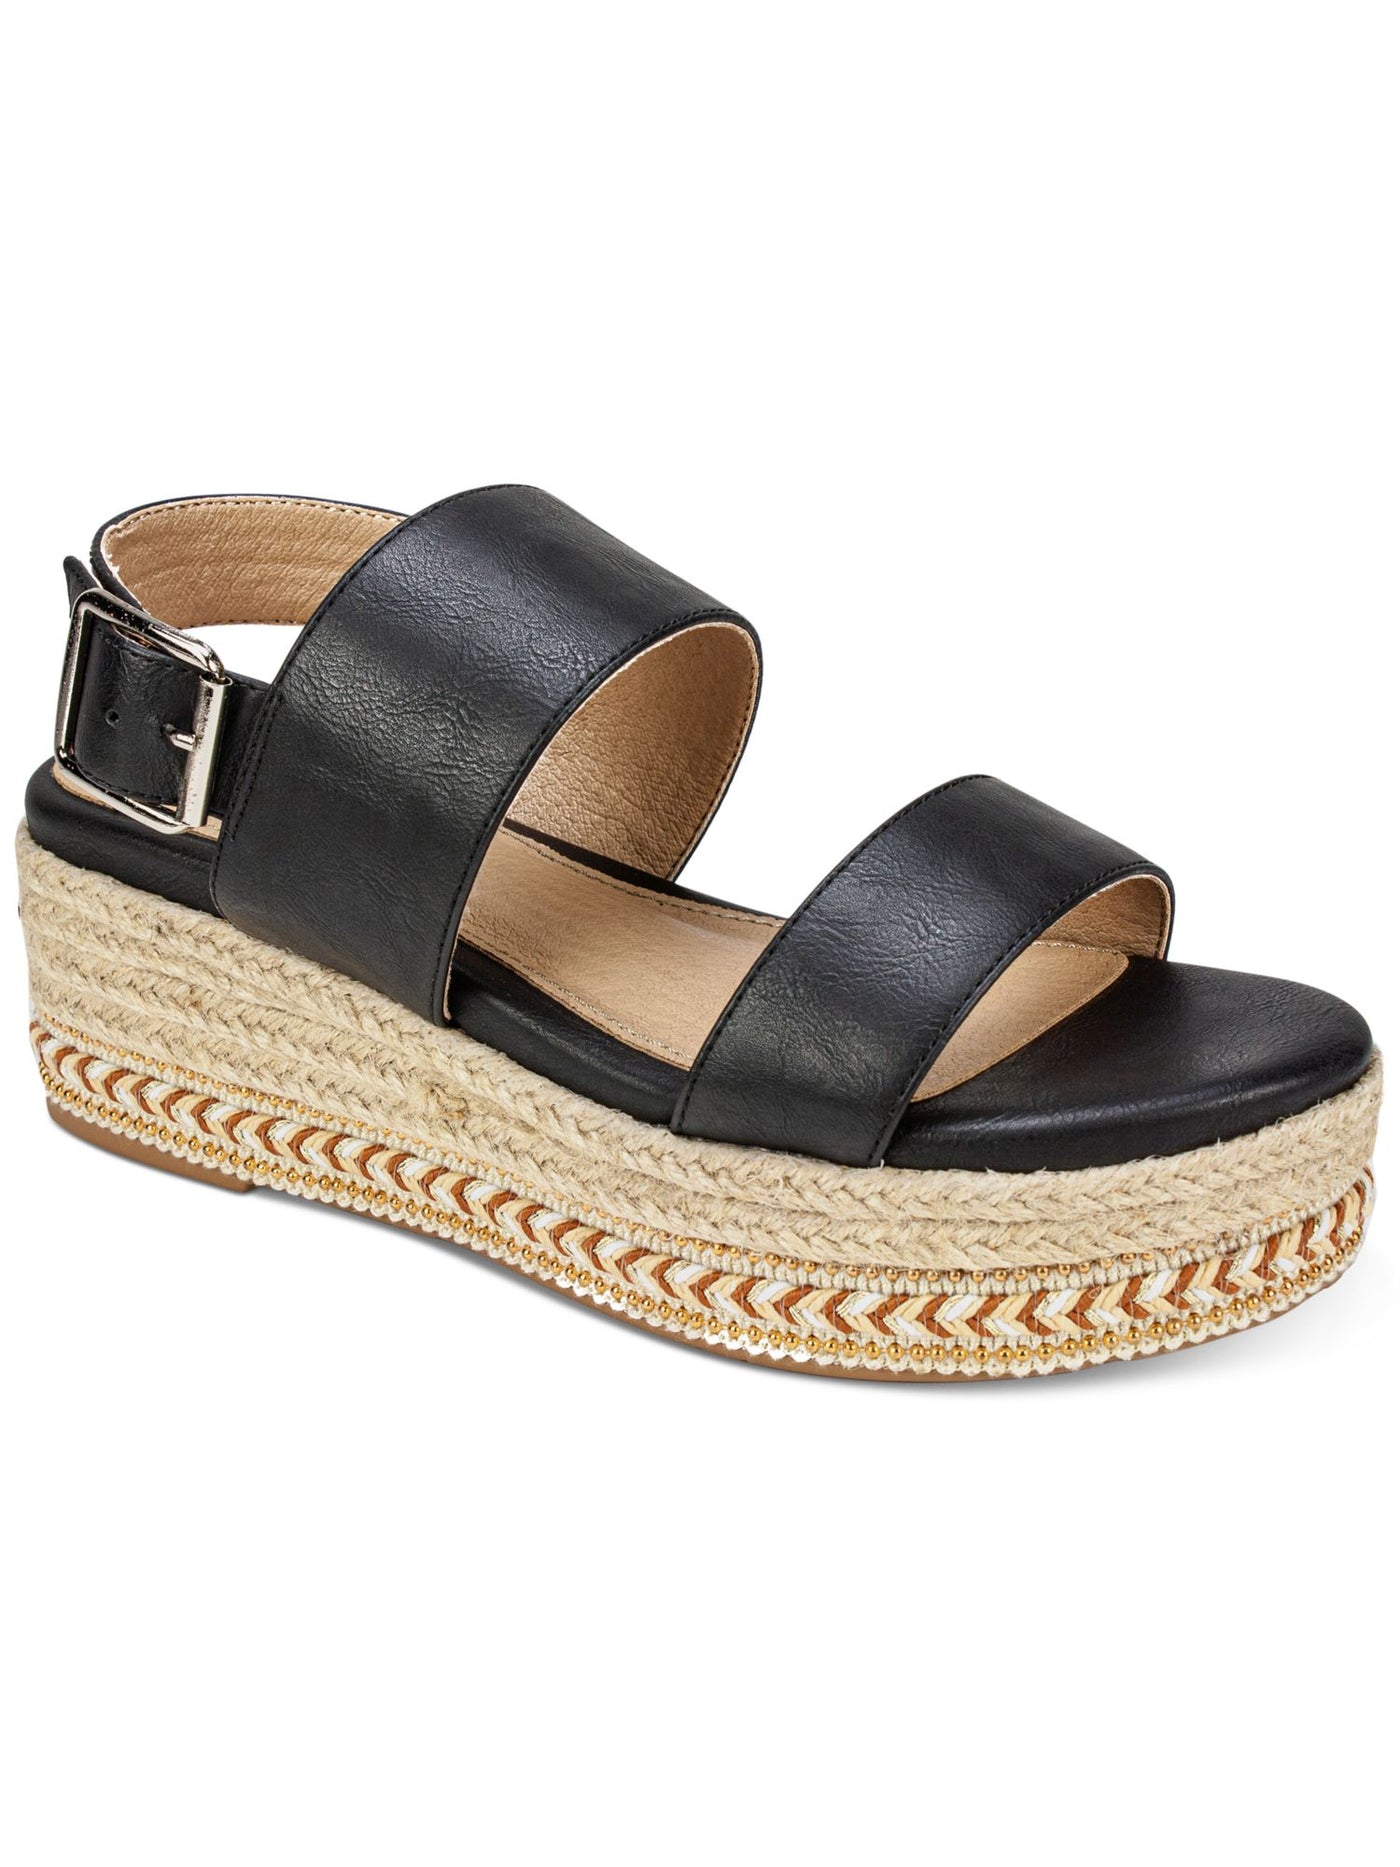 SEVEN DIALS Womens Black Trim Detailing Ankle Strap Cushioned Leawood Open Toe Wedge Buckle Dress Espadrille Shoes 8.5